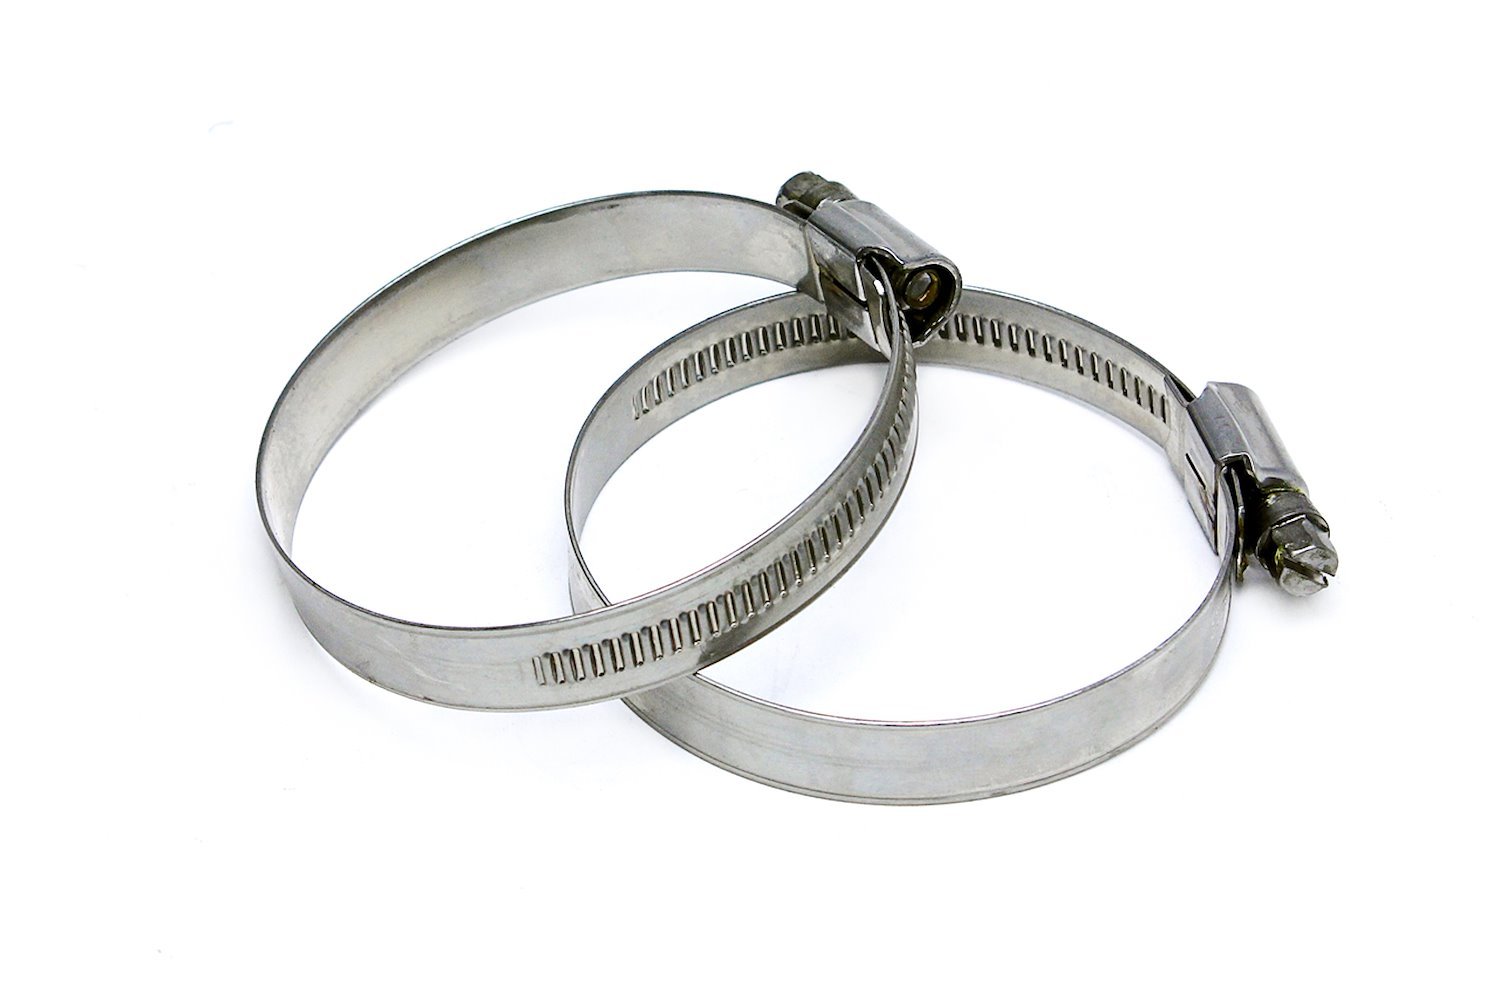 EMSC-90-110x2 Embossed Hose Clamp, Stainless Steel Embossed Hose Clamp, Size #60, Effective Range: 3-1/2 in.- 4-5/16 in., 2Pc